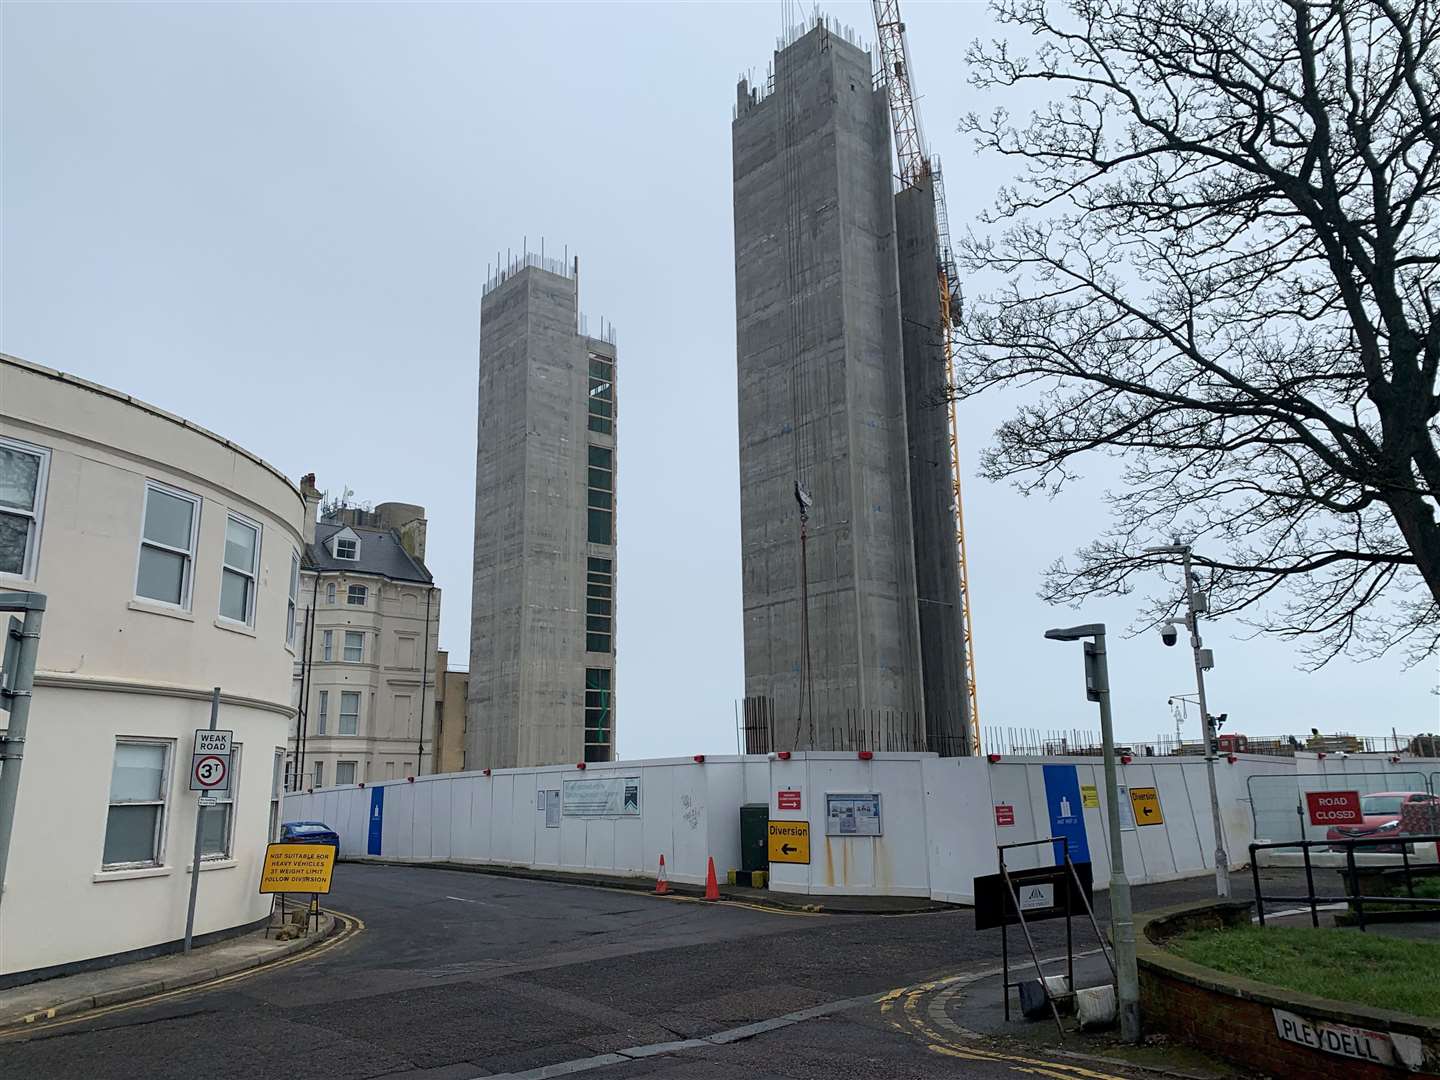 Equipment has been removed from the site as building work has paused to avoid 'unnecessary hire costs'